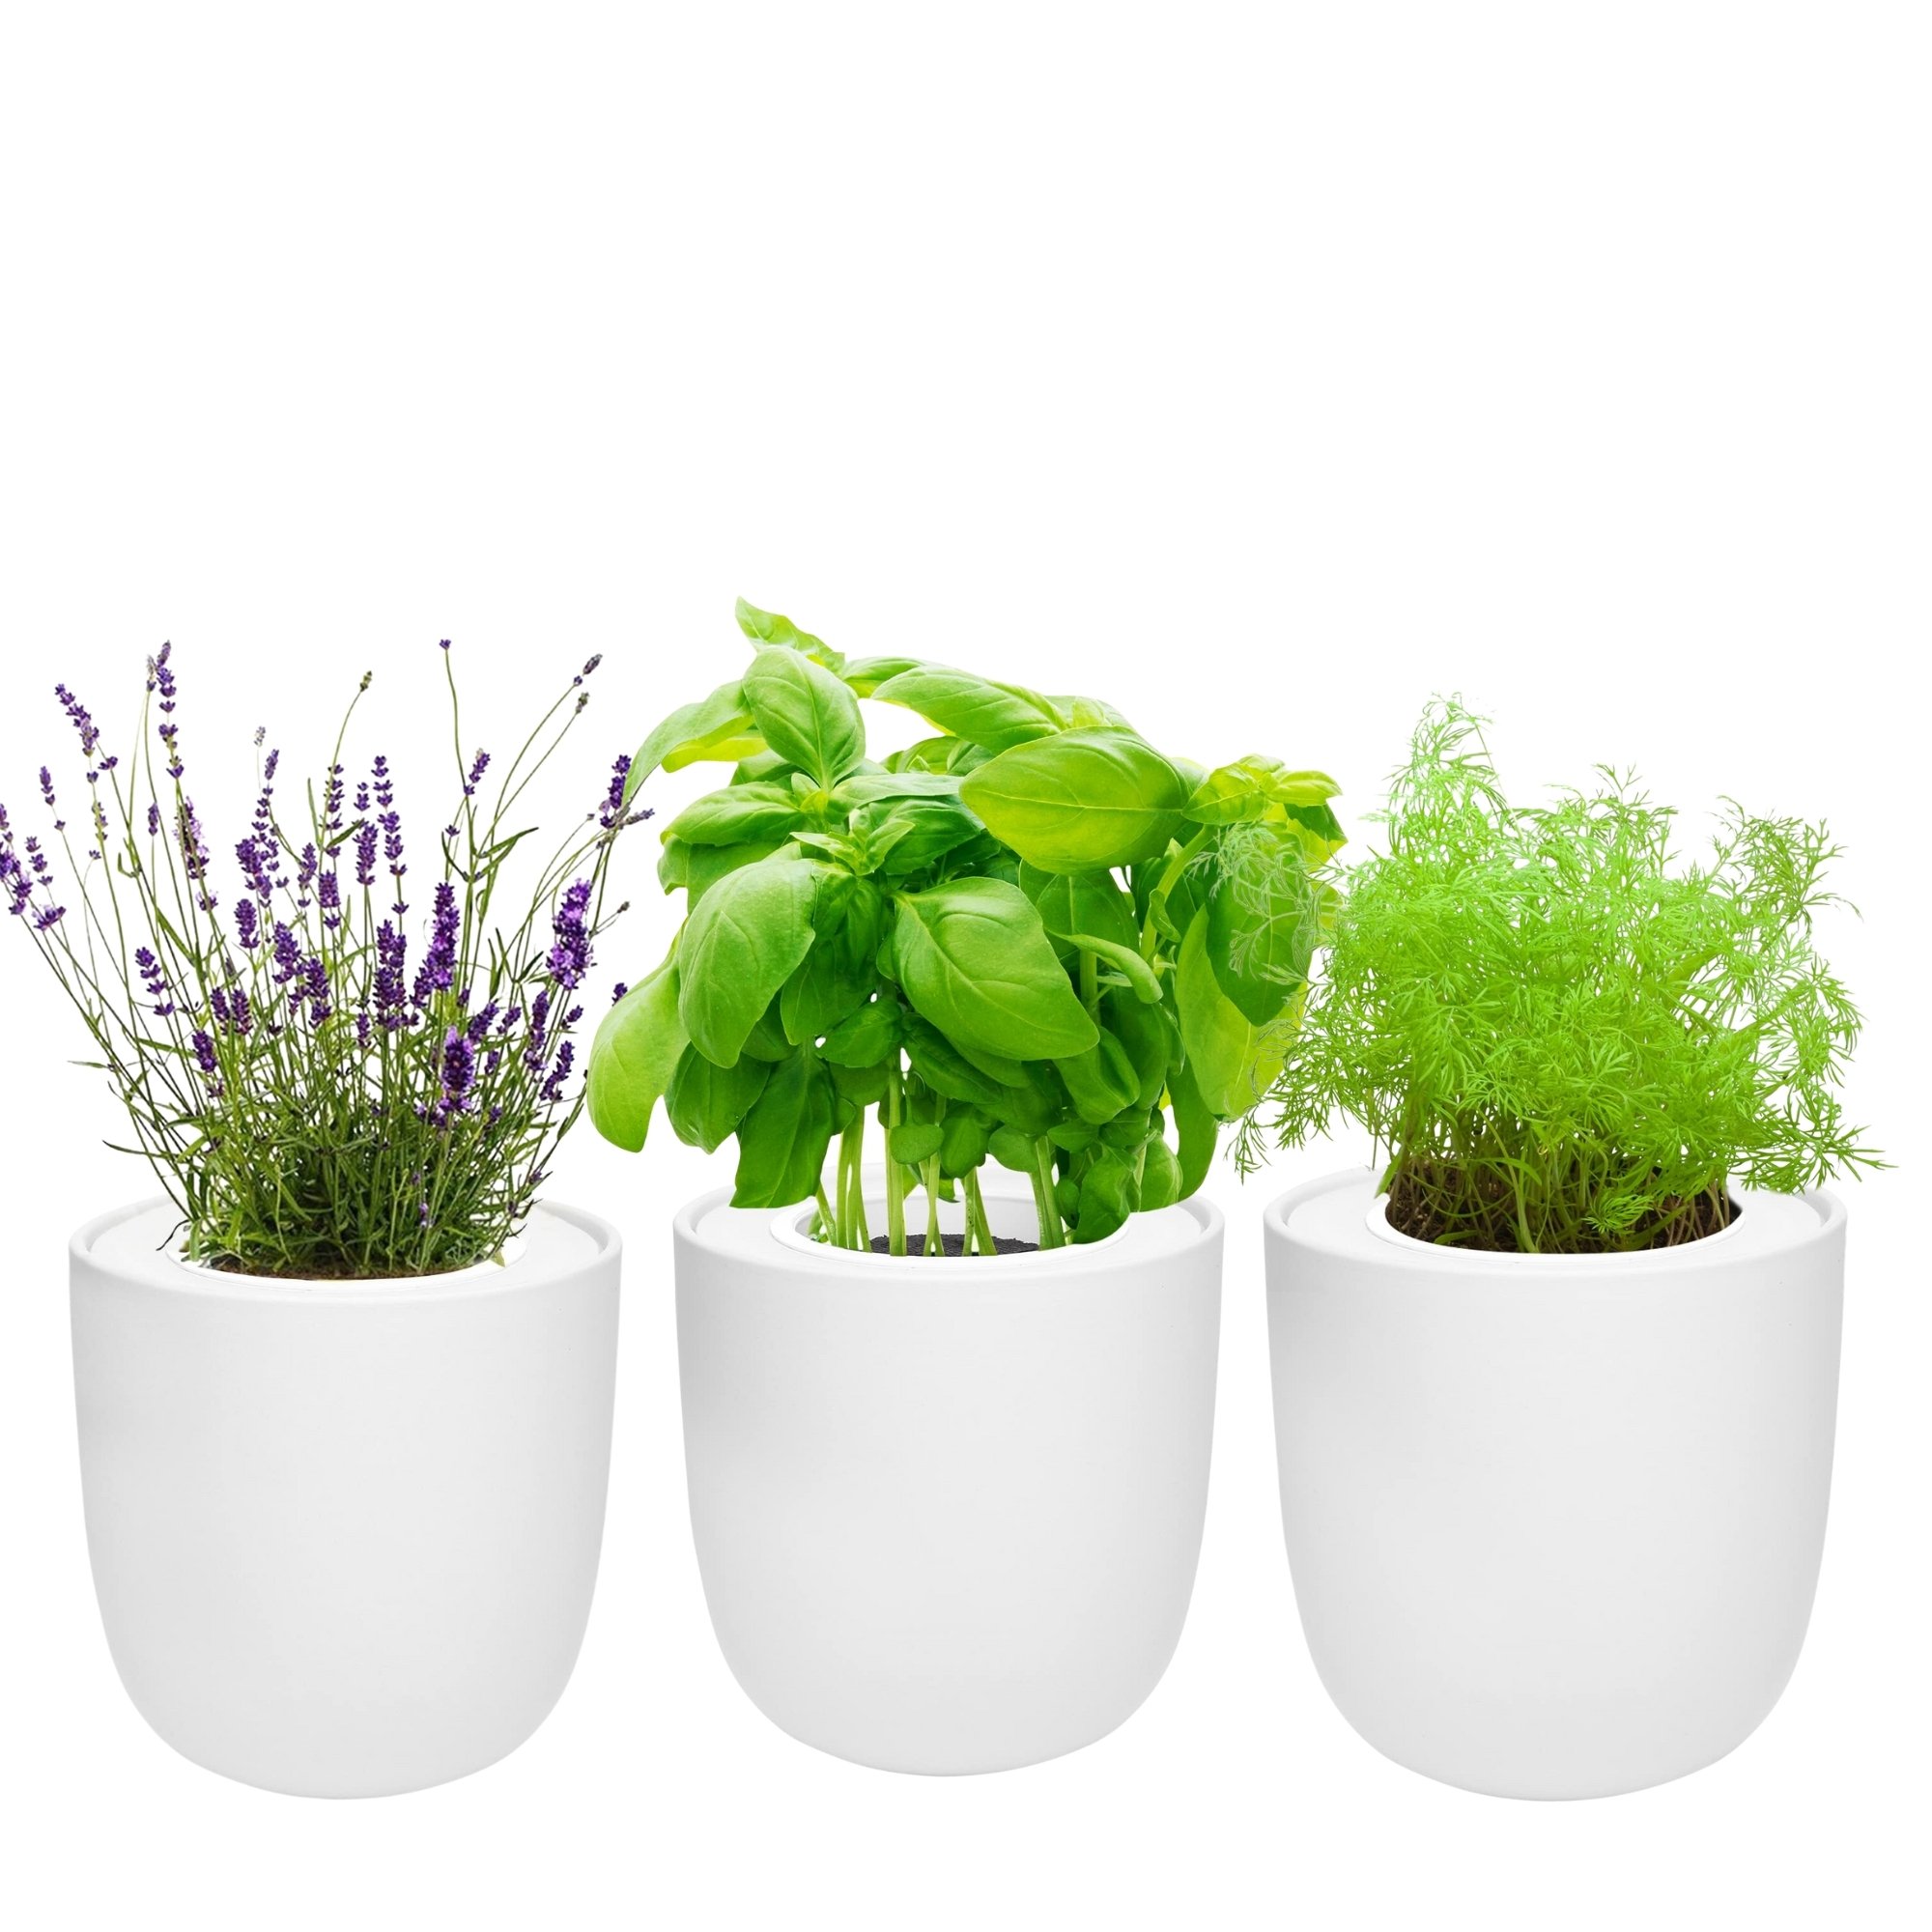 Hydroponic Herb Growing Trio Sets with White Ceramic Pot and Seeds (Basil, Dill, Lavender)